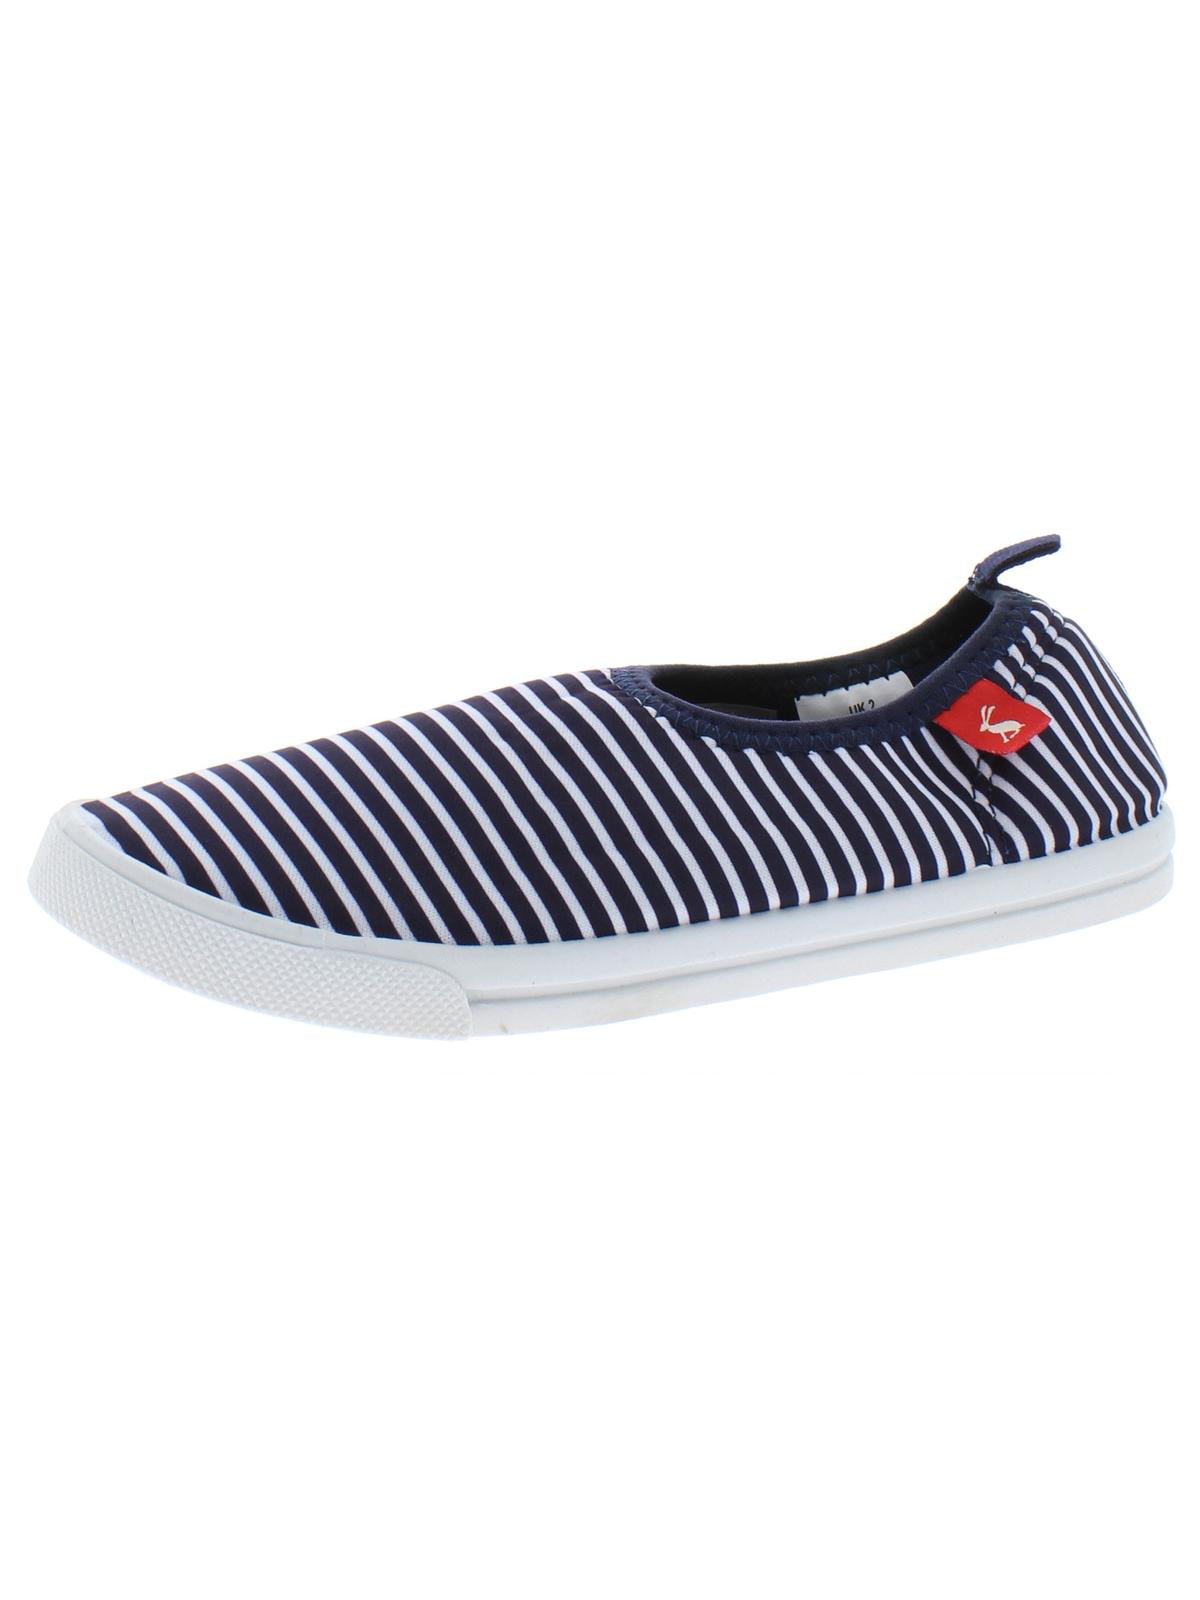 JOULES BOYS SWIM SHOES IN 3 DESIGNS 